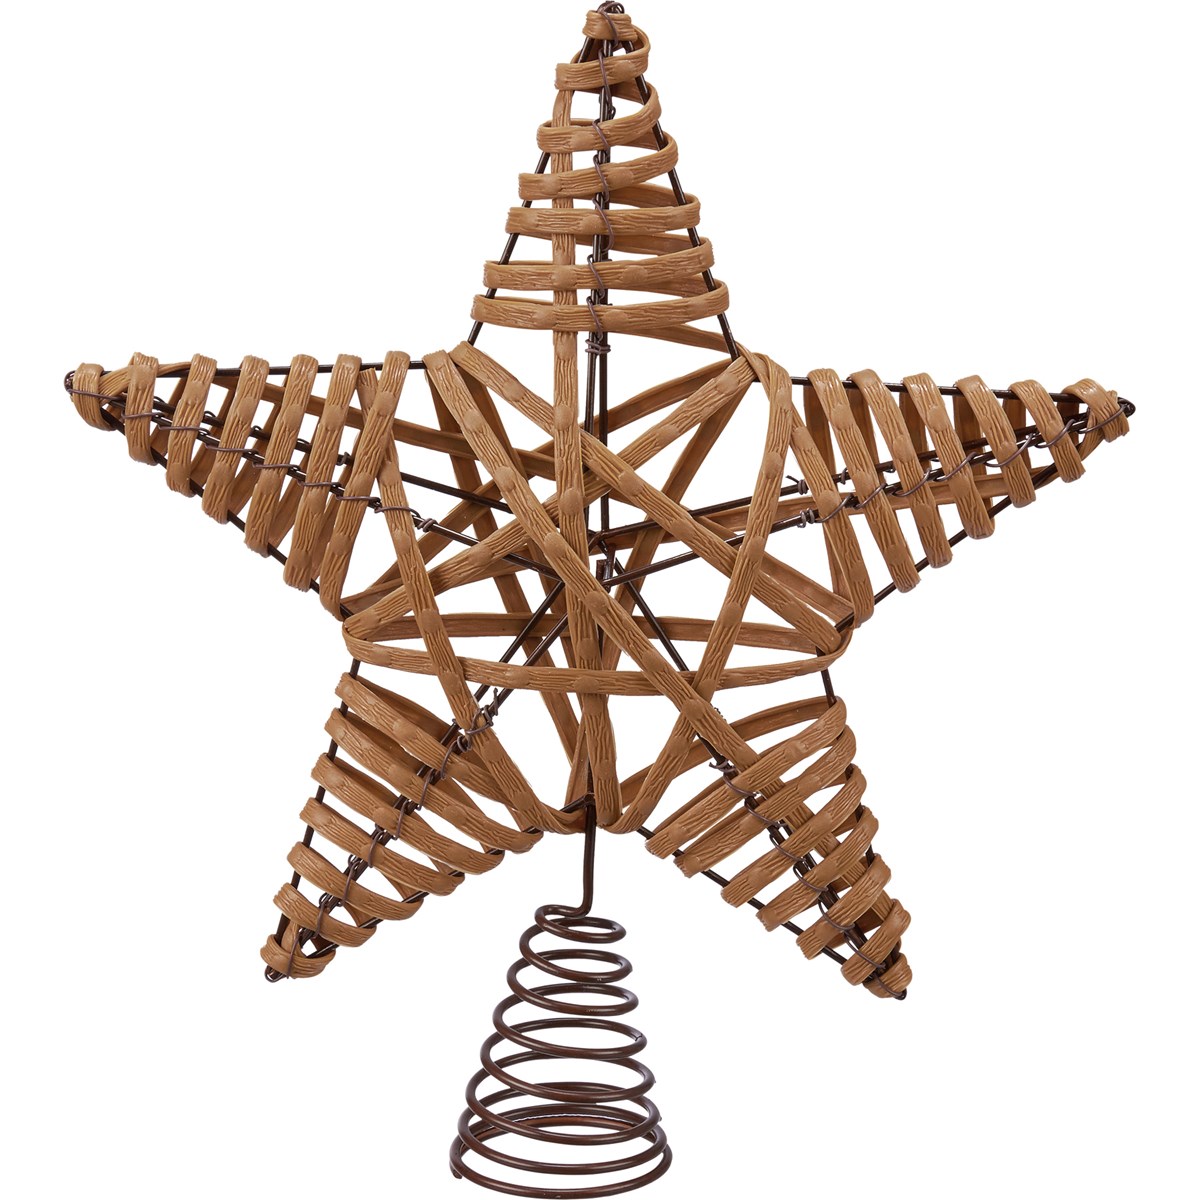 Natural Star Tree Topper - Rattan, Wire